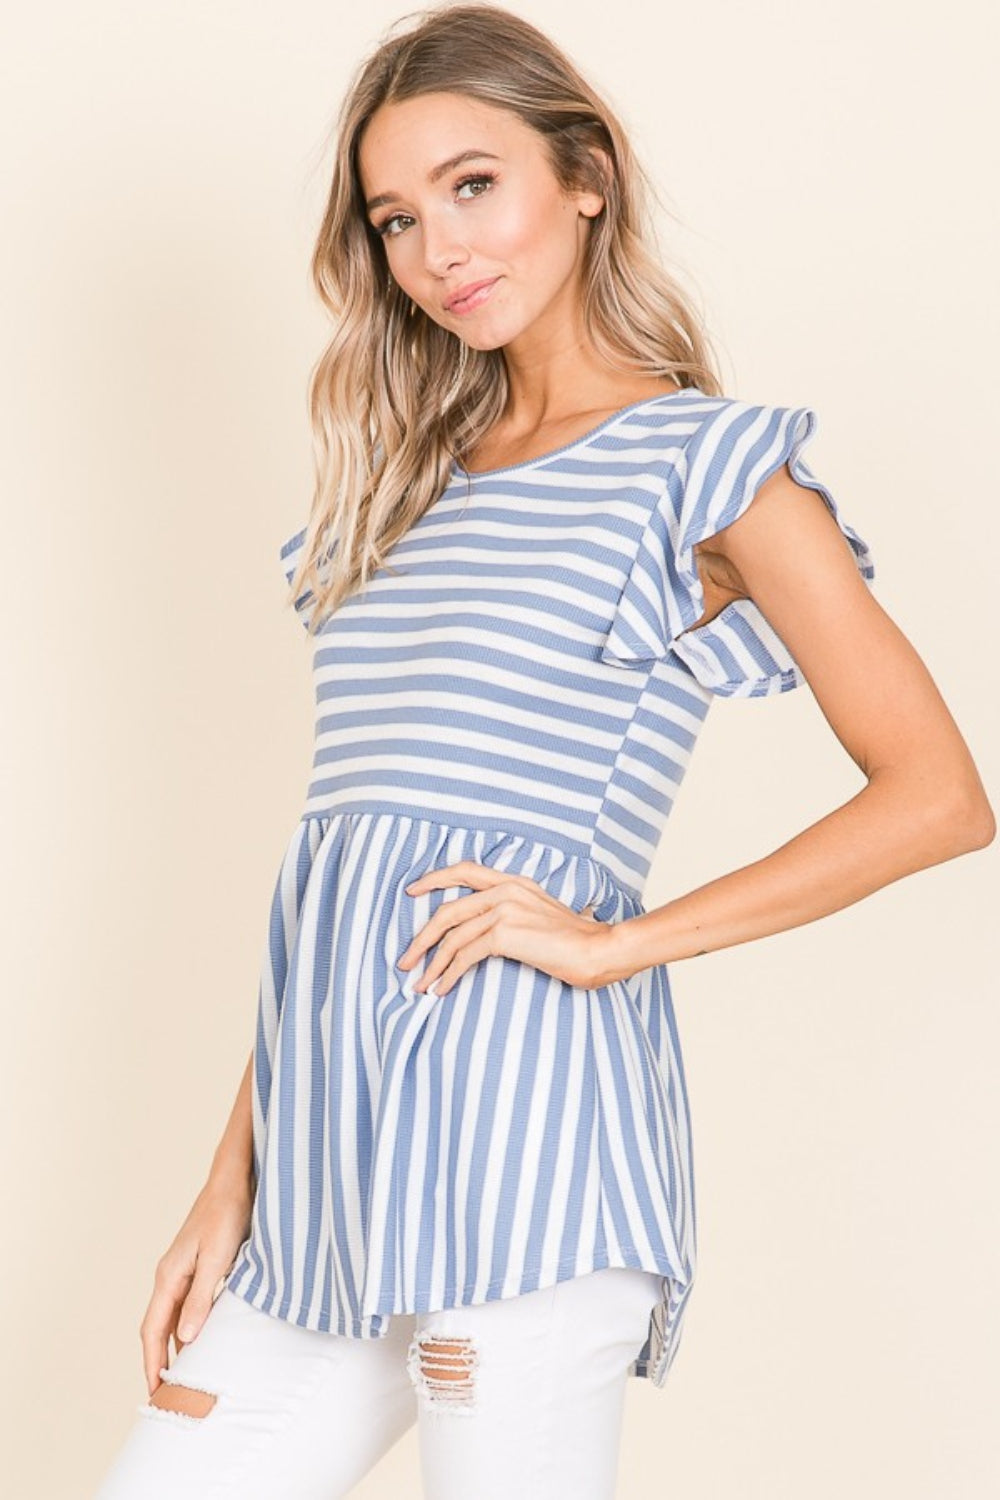 Cloudy Skies Striped Blouse